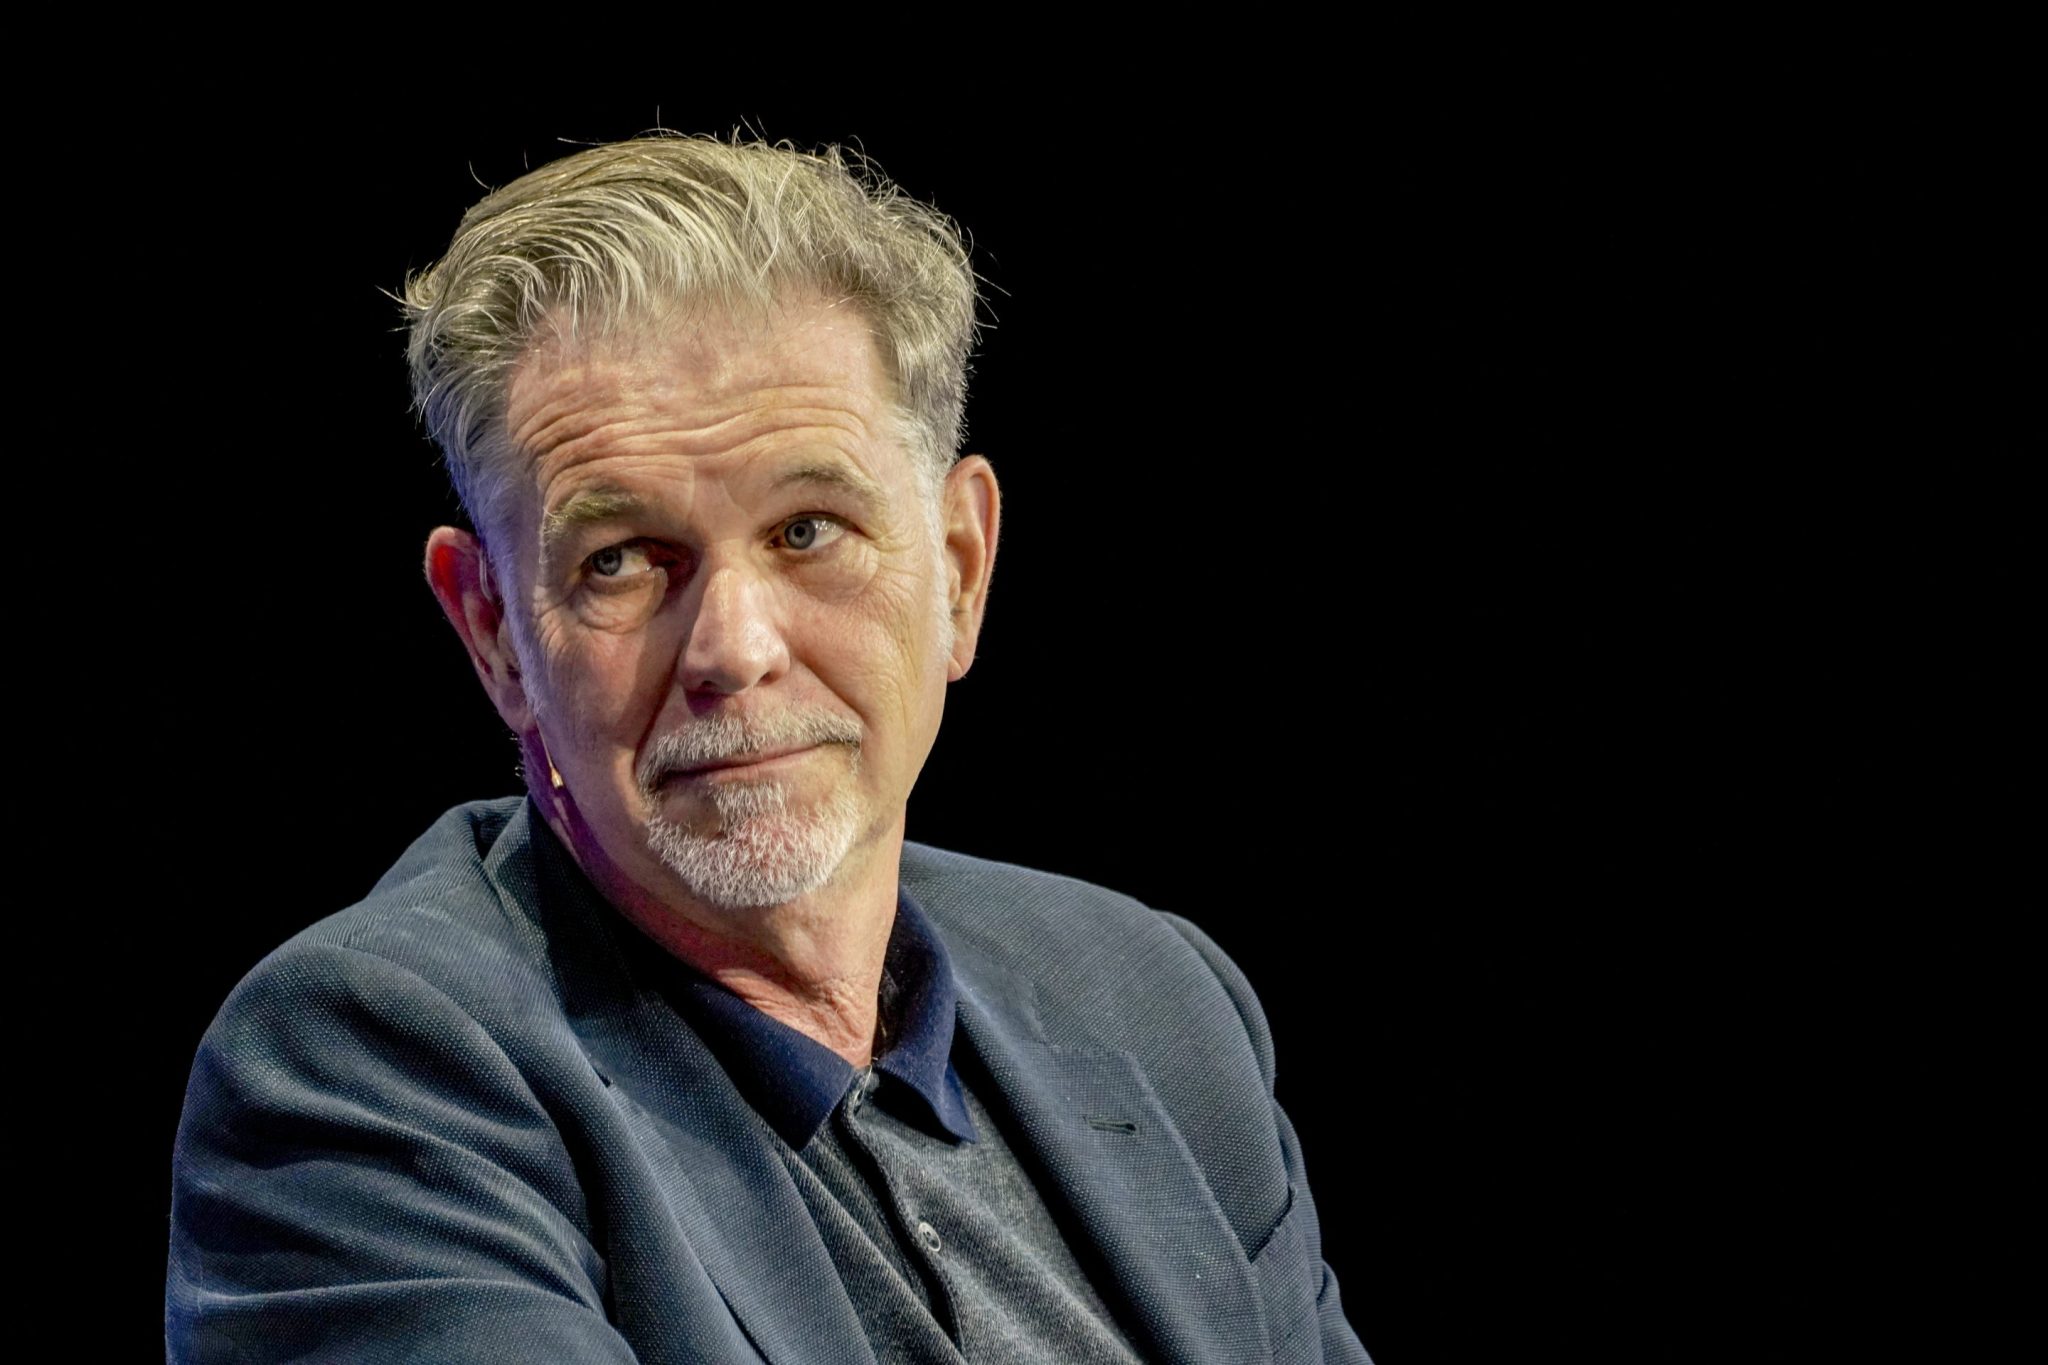 Reed Hastings only invests in index funds and Netflix